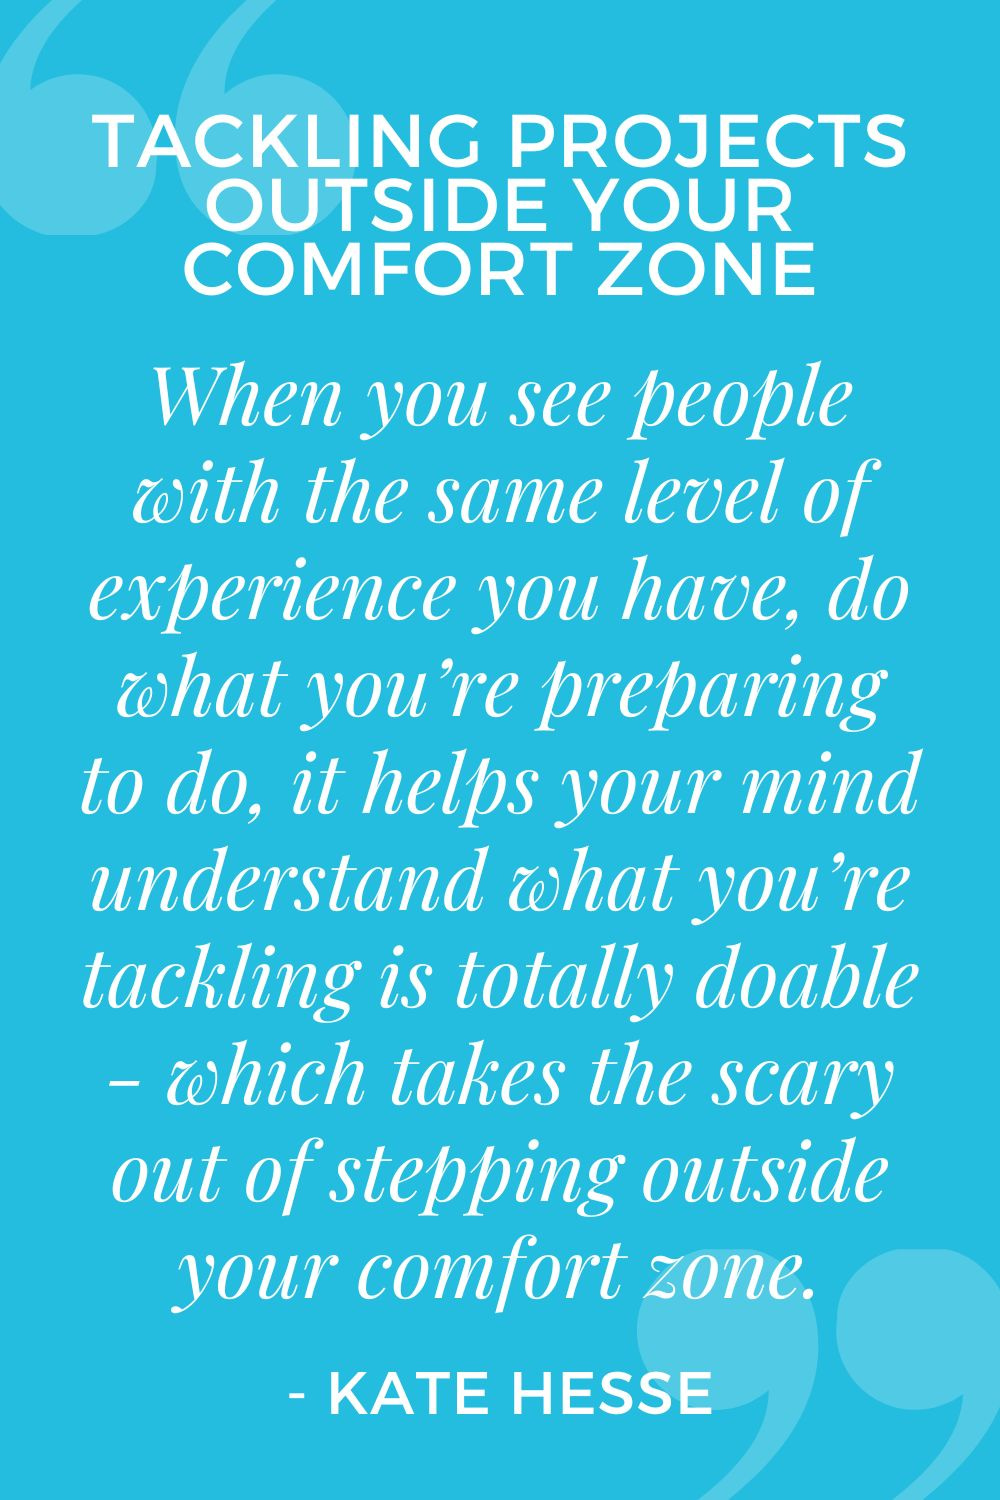 When you see people with the same level of experience you have, do what you're preparing to do, it helps your mind understand what you're tackling is totally doable - which takes the scary out of stepping outside your comfort zone.